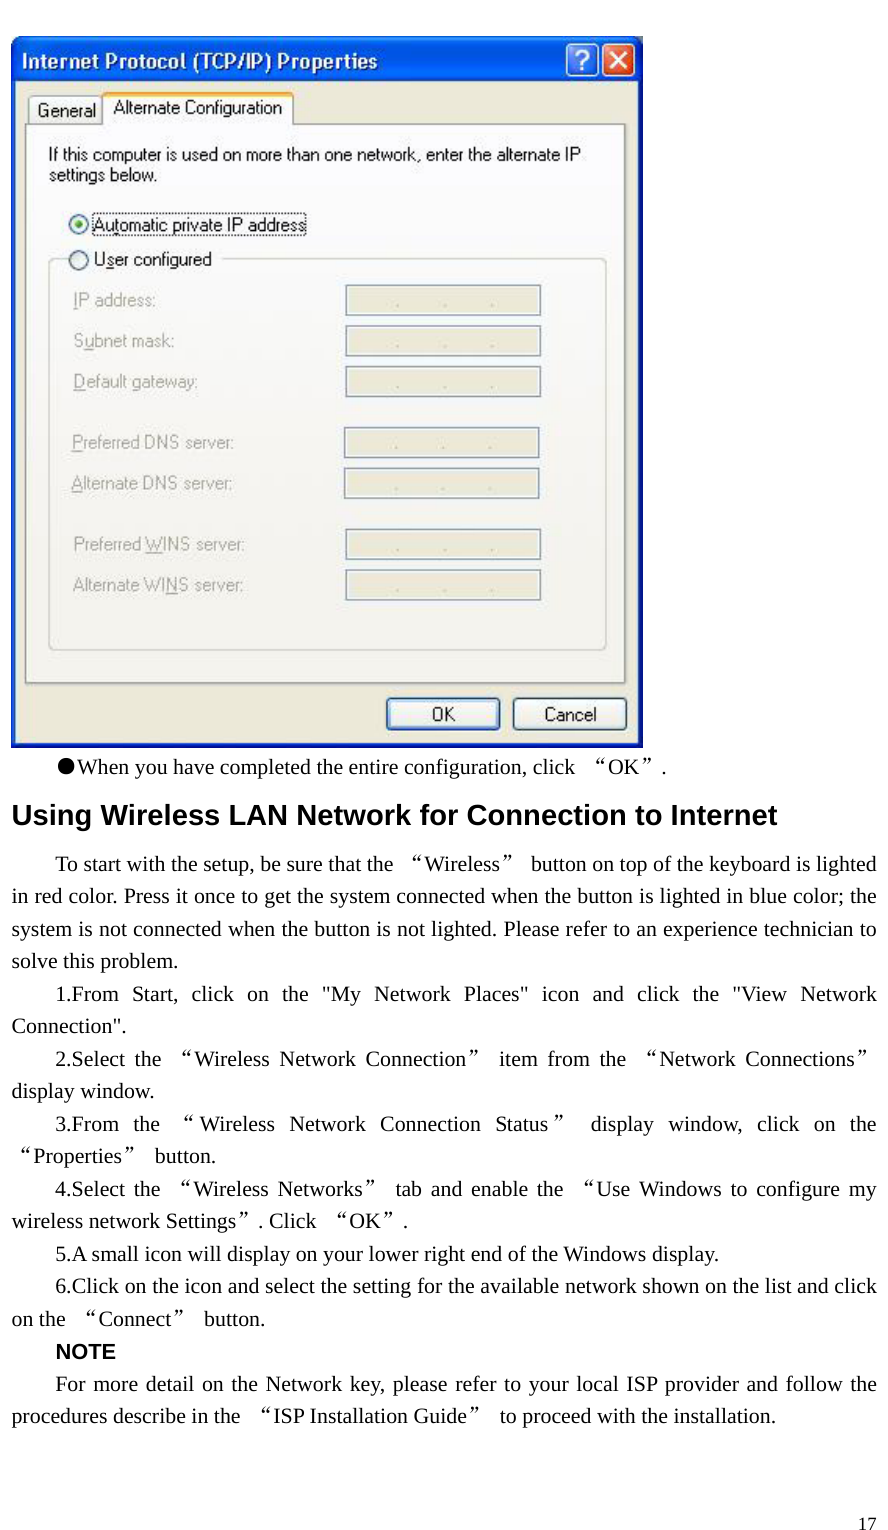   17 ●When you have completed the entire configuration, click  “OK”. Using Wireless LAN Network for Connection to Internet To start with the setup, be sure that the  “Wireless”  button on top of the keyboard is lighted in red color. Press it once to get the system connected when the button is lighted in blue color; the system is not connected when the button is not lighted. Please refer to an experience technician to solve this problem.     1.From Start, click on the &quot;My Network Places&quot; icon and click the &quot;View Network Connection&quot;.     2.Select the “Wireless Network Connection” item from the “Network Connections” display window.     3.From  the “Wireless Network Connection Status ” display window, click on the “Properties” button. 4.Select the “Wireless Networks” tab and enable the “Use Windows to configure my wireless network Settings”. Click  “OK”. 5.A small icon will display on your lower right end of the Windows display. 6.Click on the icon and select the setting for the available network shown on the list and click on the  “Connect” button. NOTE For more detail on the Network key, please refer to your local ISP provider and follow the procedures describe in the  “ISP Installation Guide”  to proceed with the installation. 